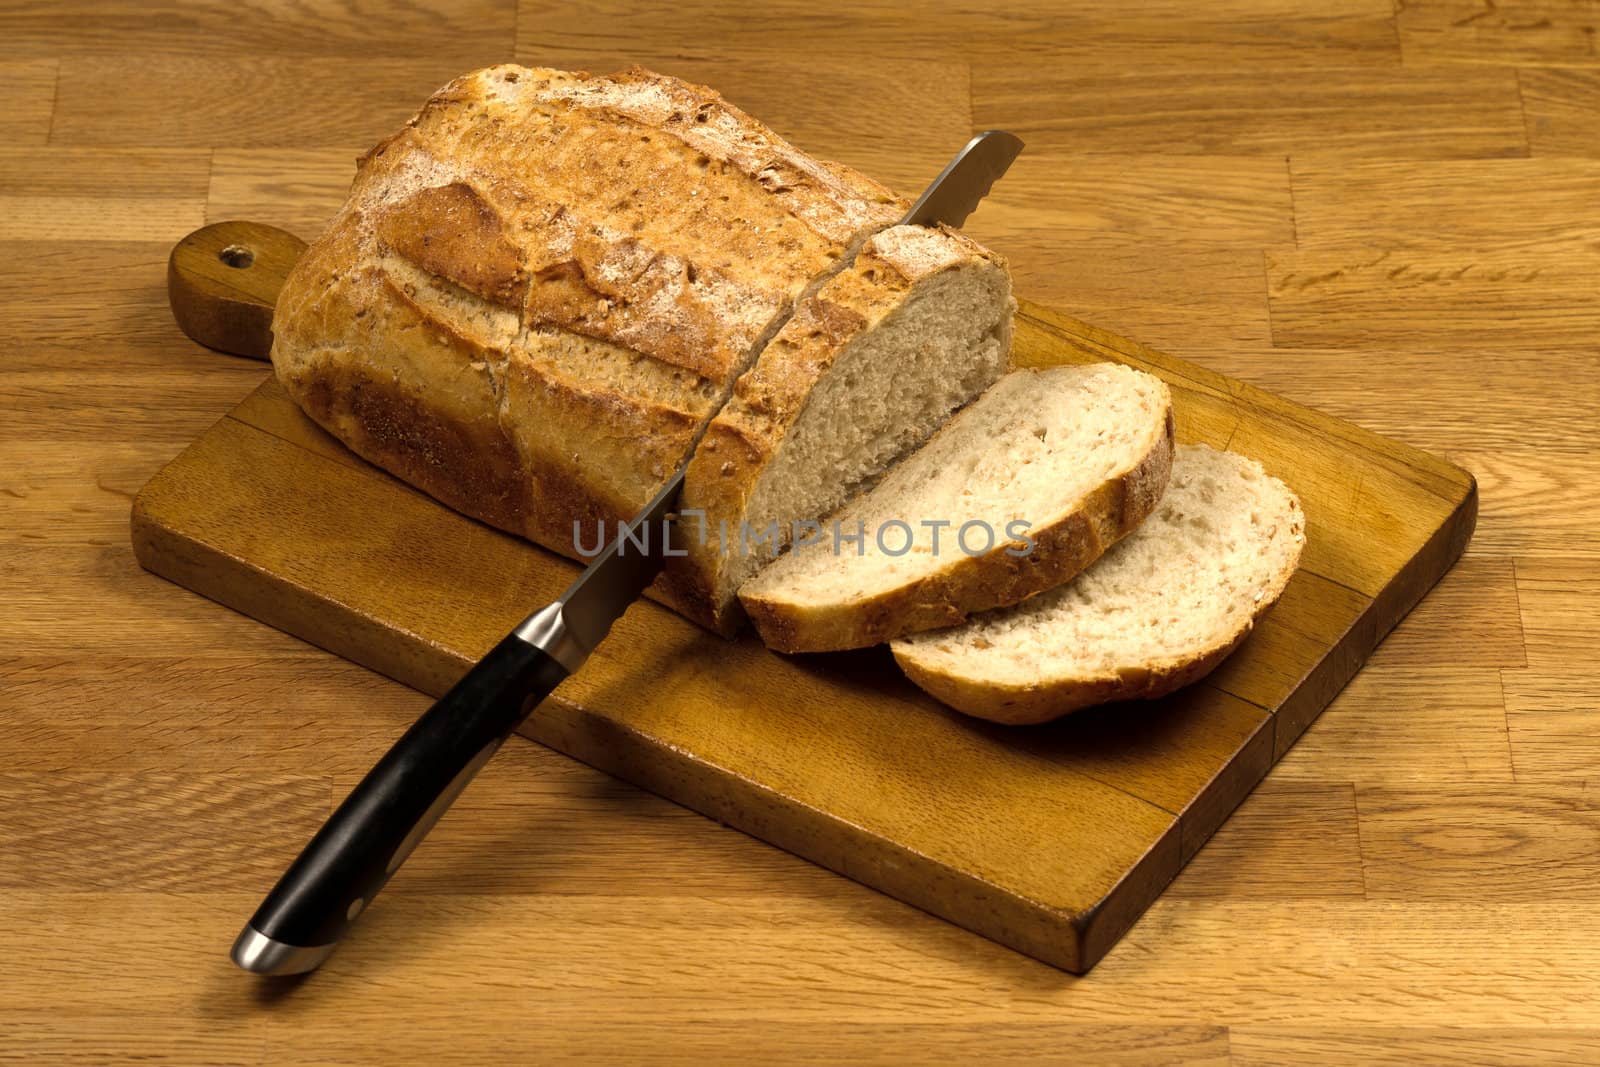 Wooden cutting board with sliced white bread and knife on wooden table